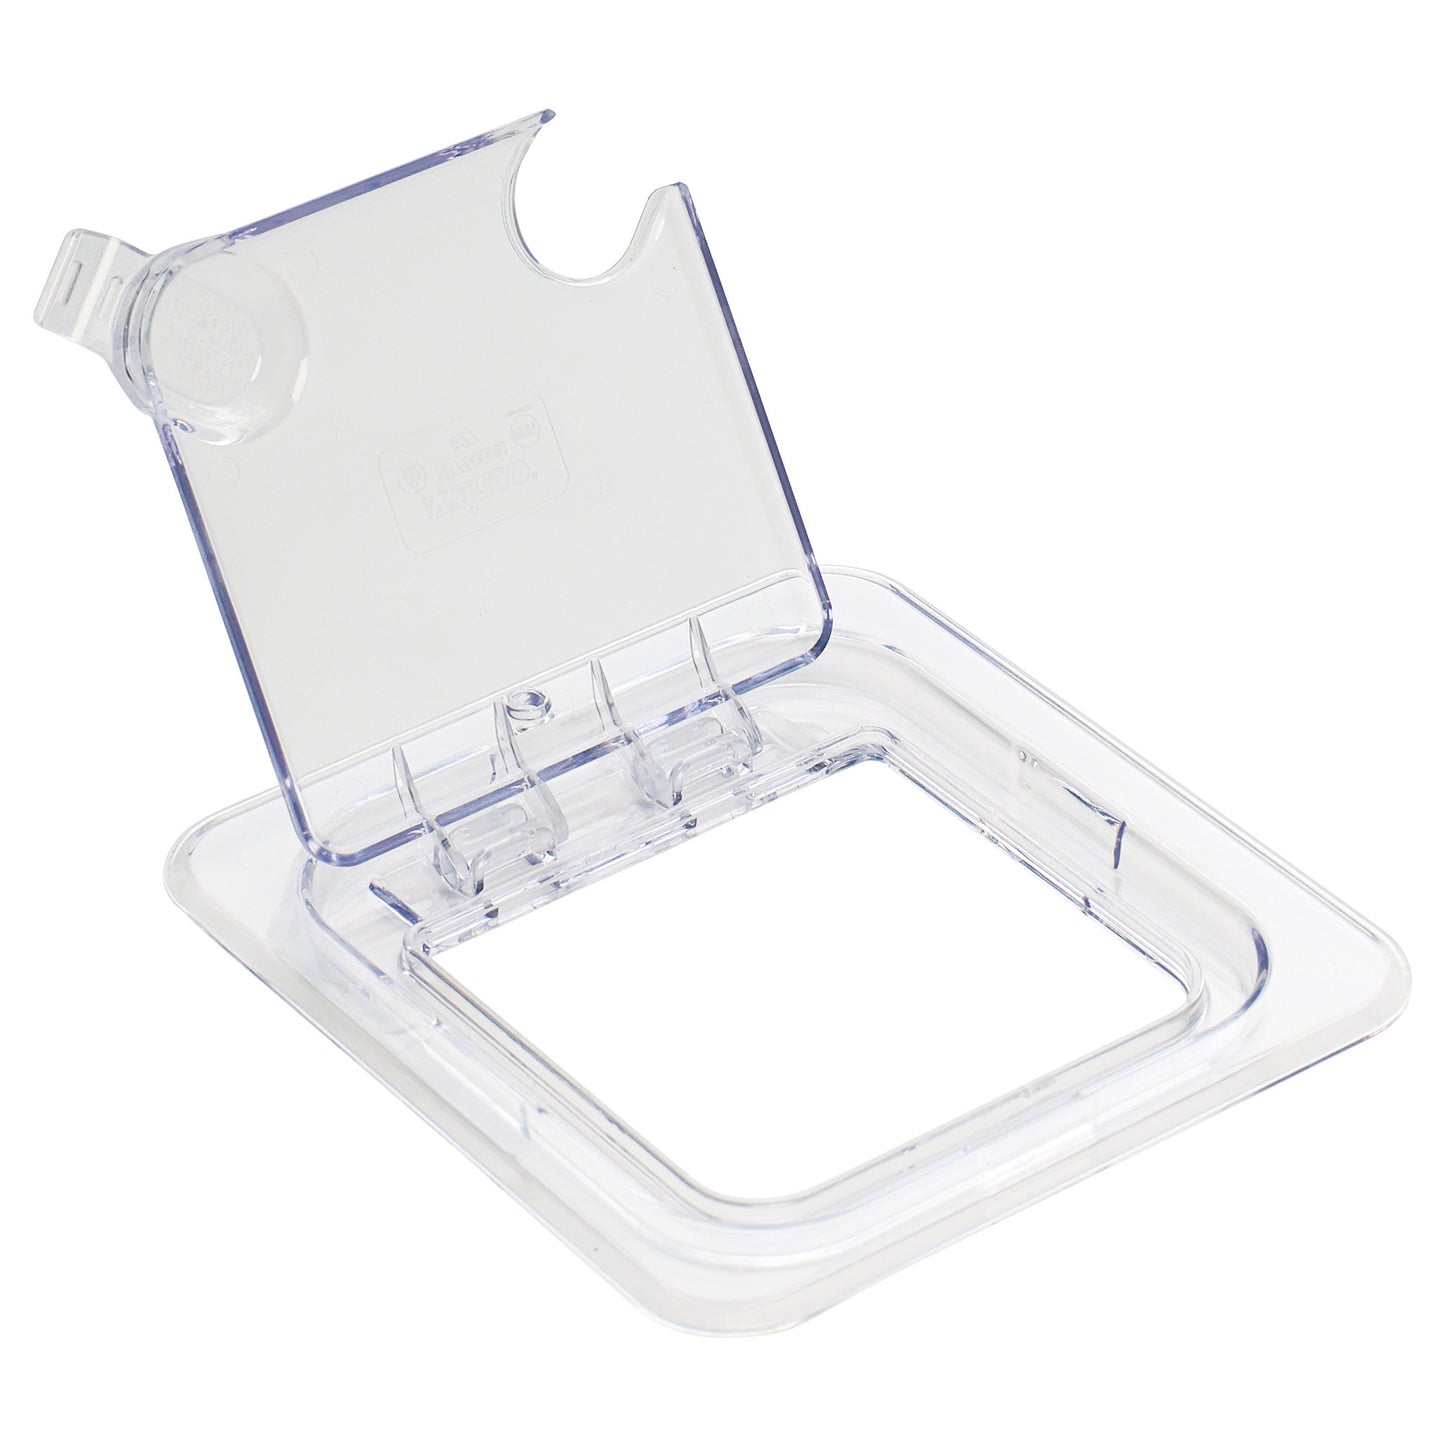 Polycarbonate Food Pan Cover, Hinged - Sixth (1/6)